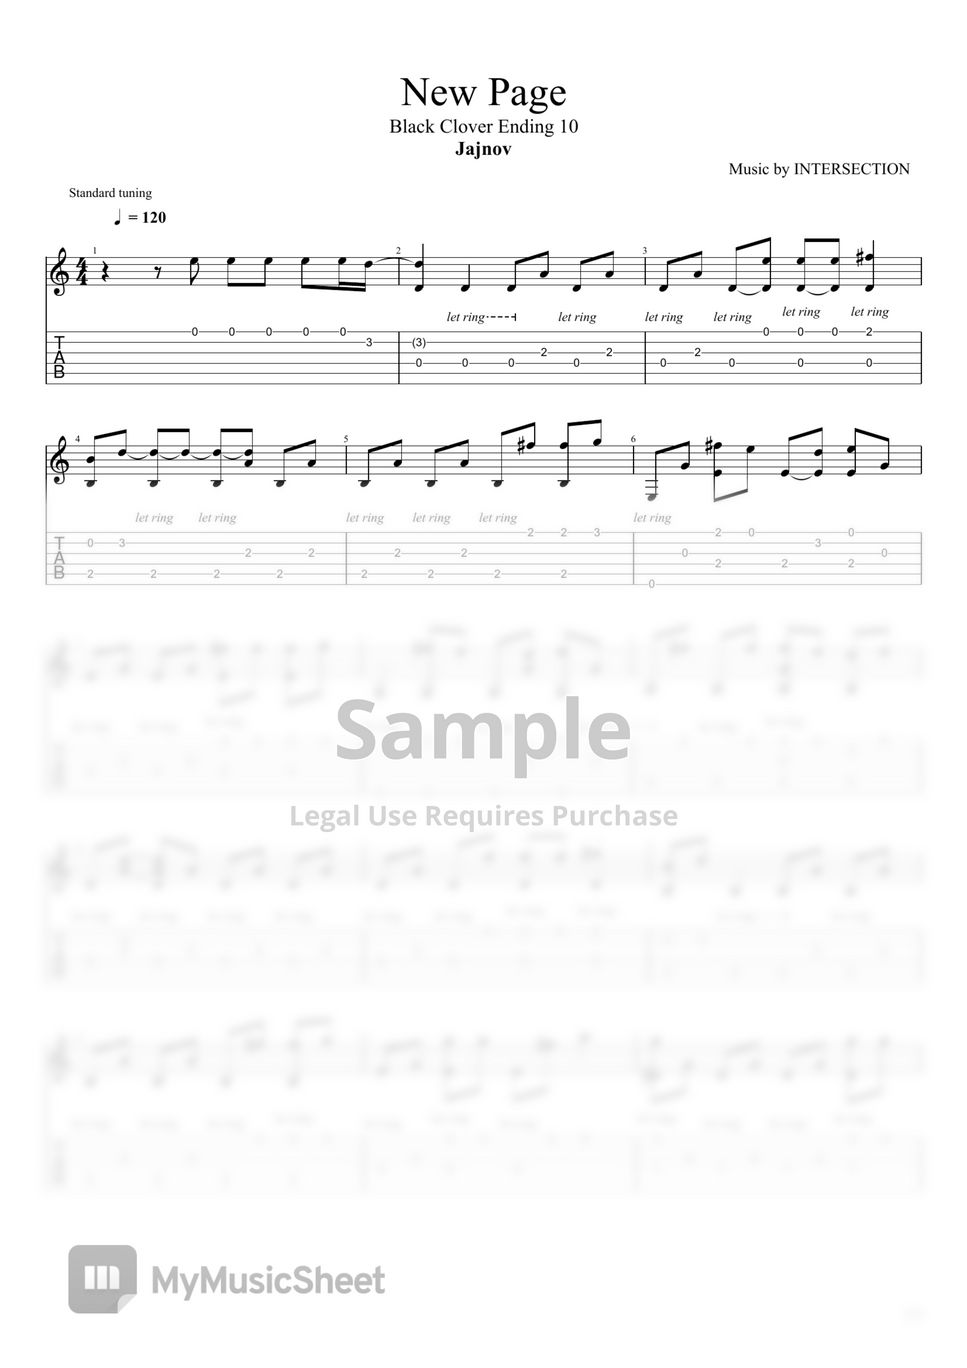 Black Clover ED - New Page (Guitar) Sheets by Jajnov